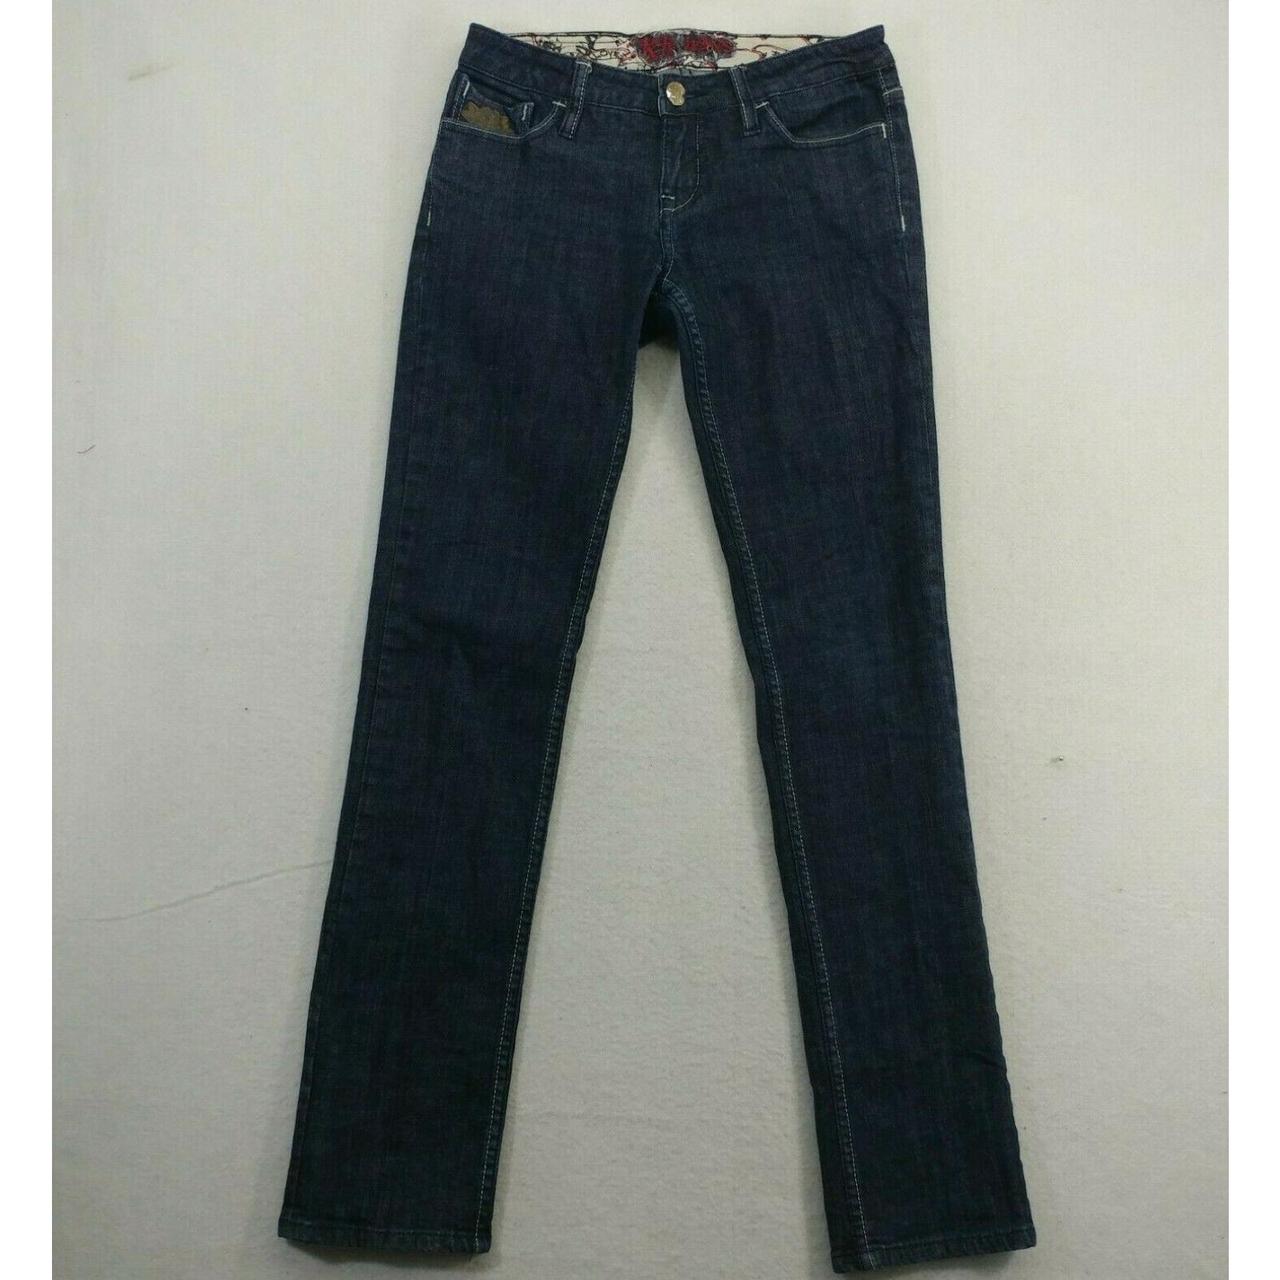 Product Image 1 - Pepe Jeans Womens 27 Skinny